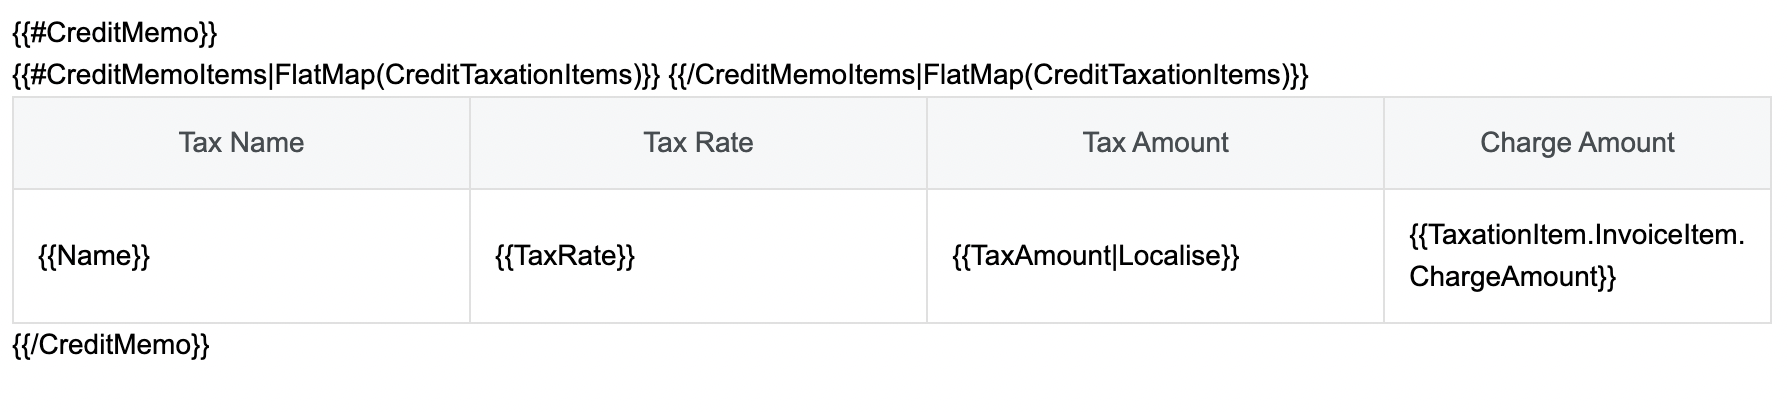 HTML_credit_memo_template_taxation_details_table.png